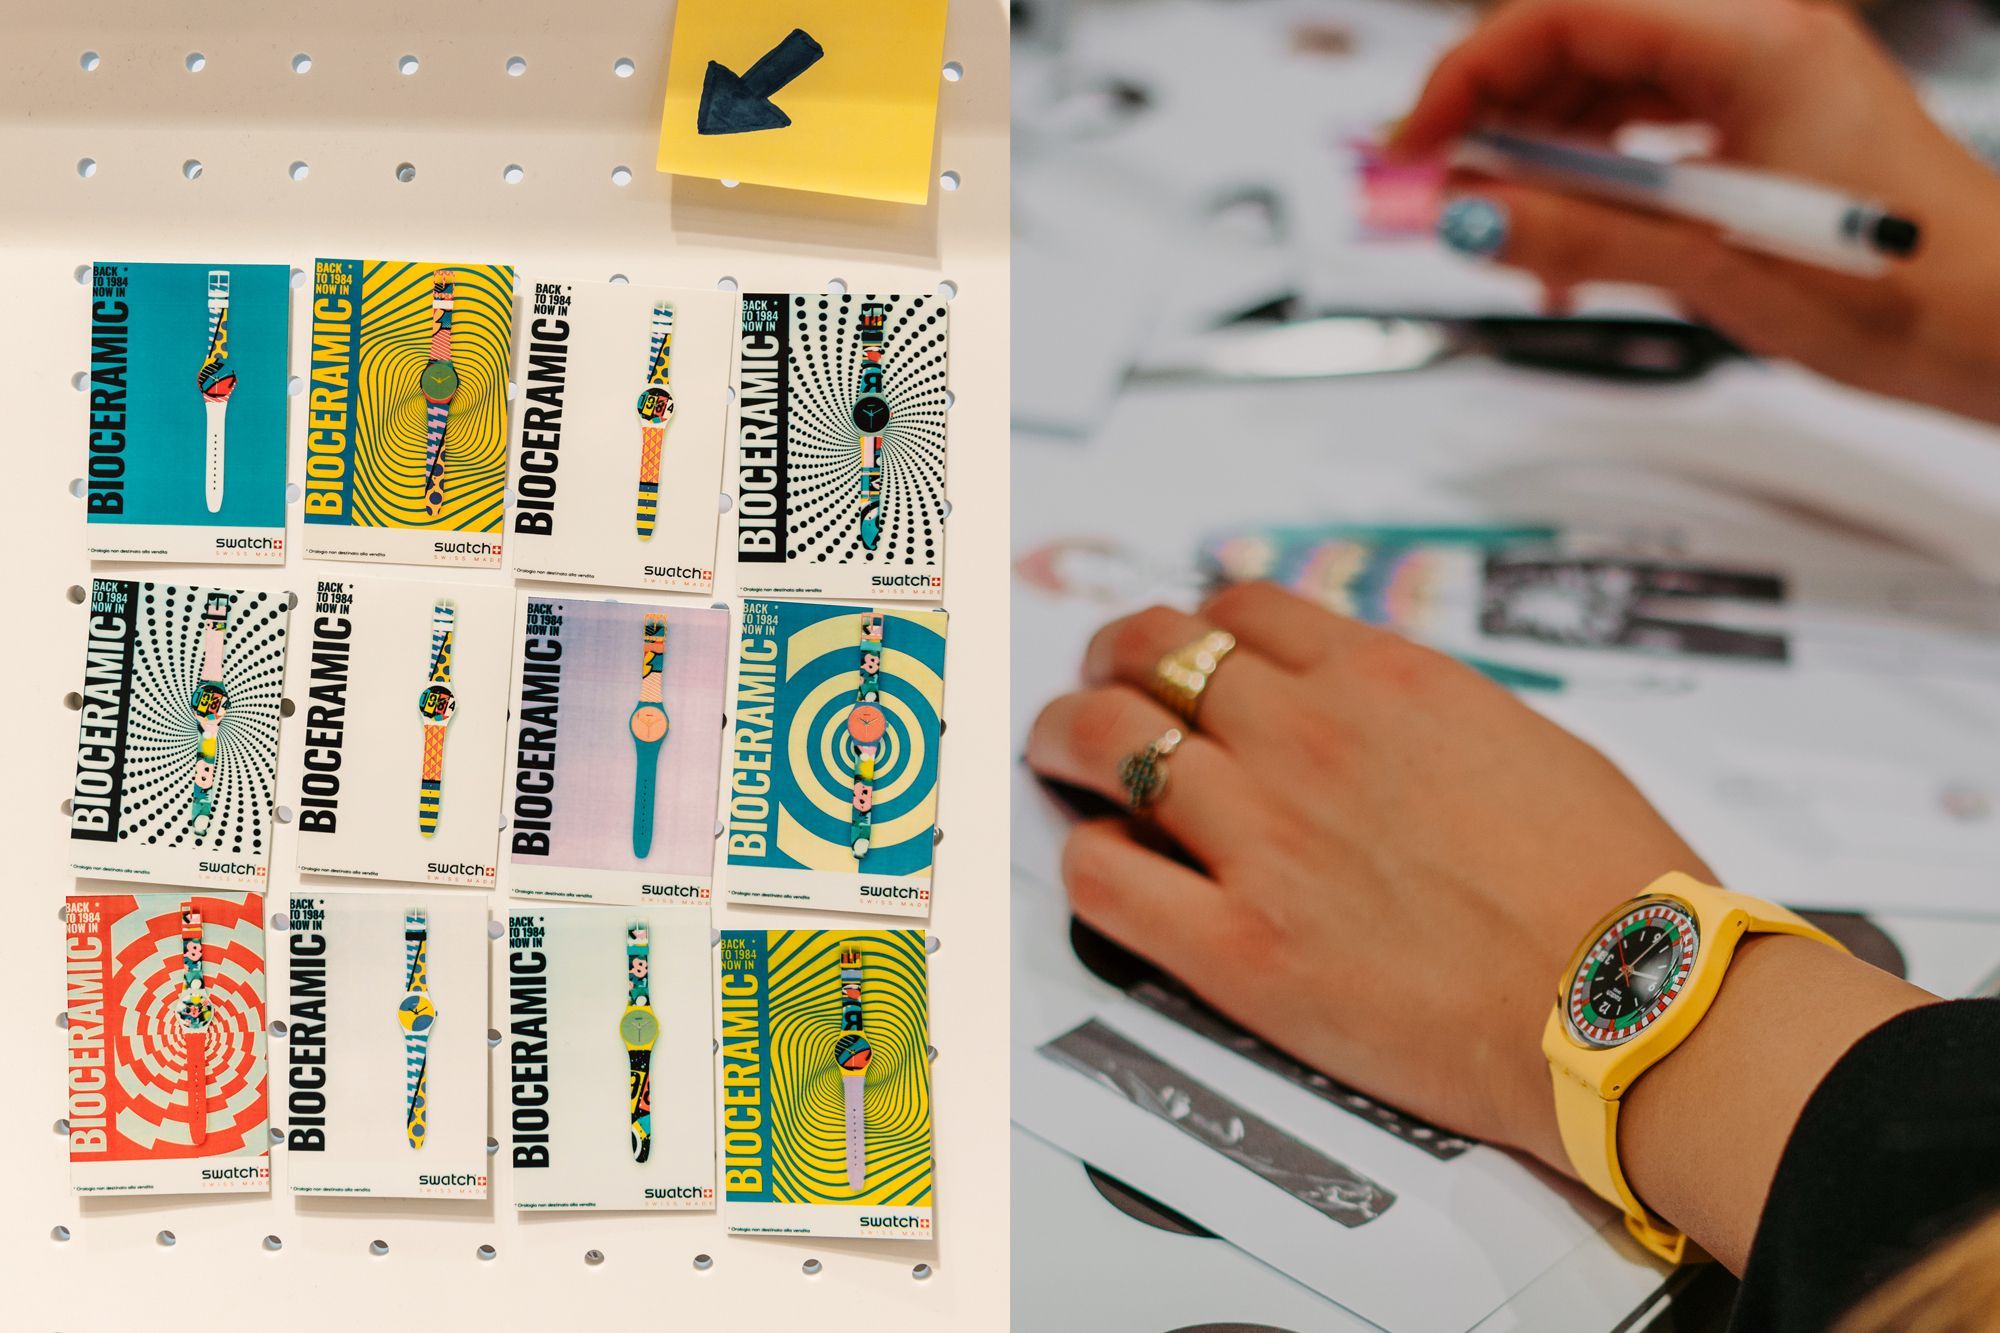 The new Swatch 1984 Reloaded collection in three creative workshops See what happened in the Swatch Stores in Rome, Turin and Milan